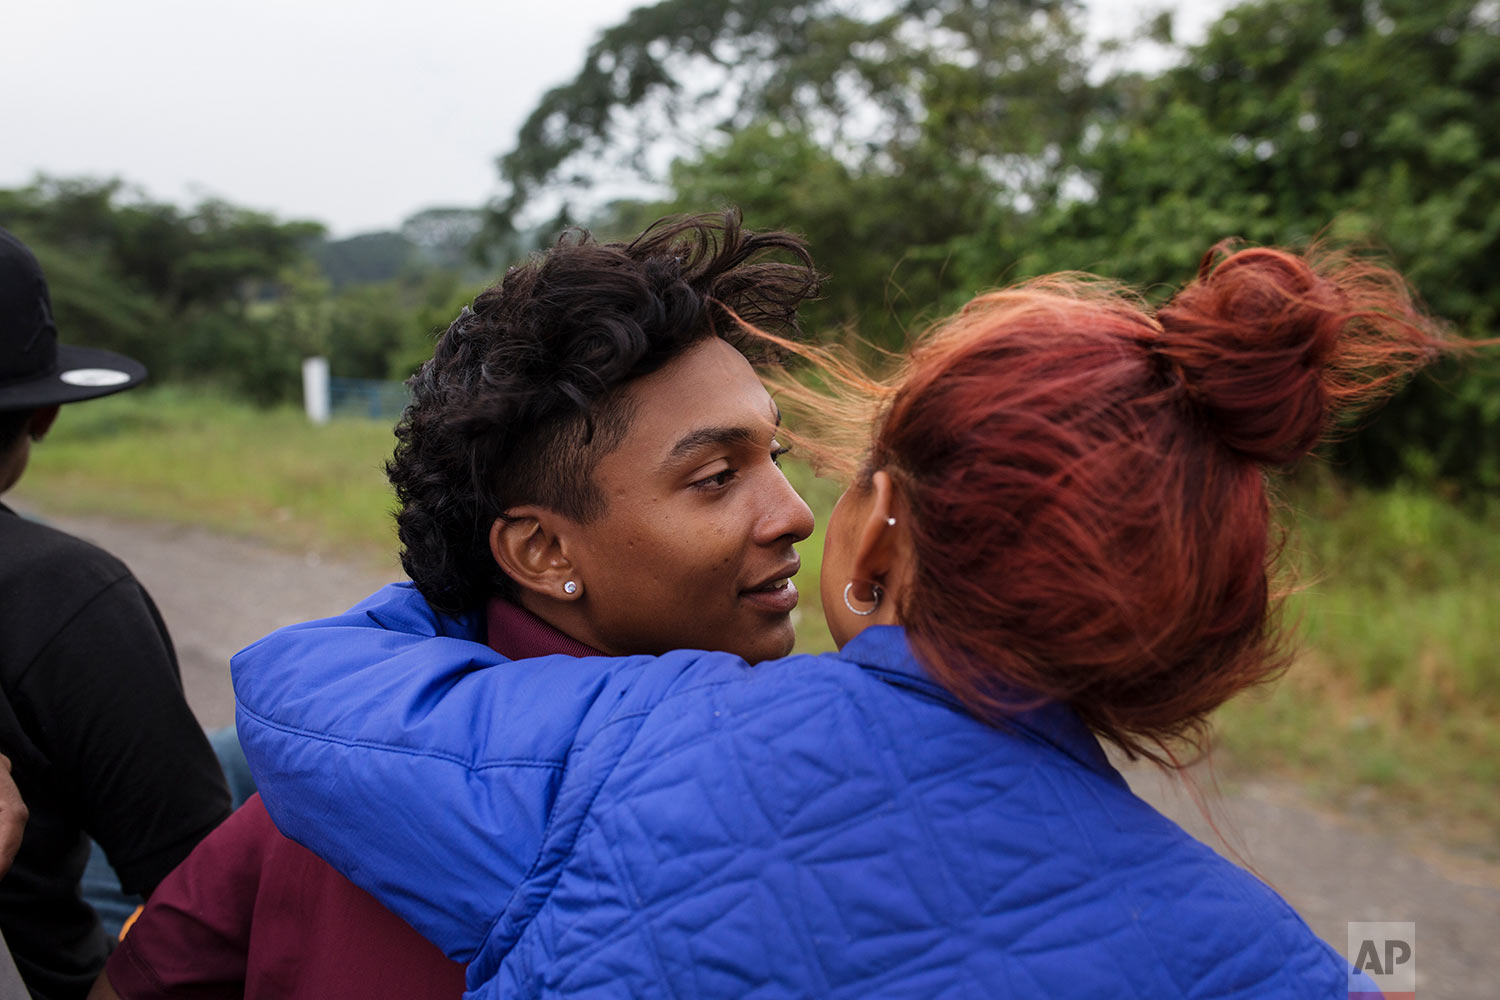  In this Nov. 2, 2018 photo, a couple who are part of a group of 50 or so LGBTQ migrants traveling with the migrant caravan hoping to reach the U.S. border, ride on the back of a flatbed truck as they make their way to Sayula, Mexico.  (AP Photo/Rodr